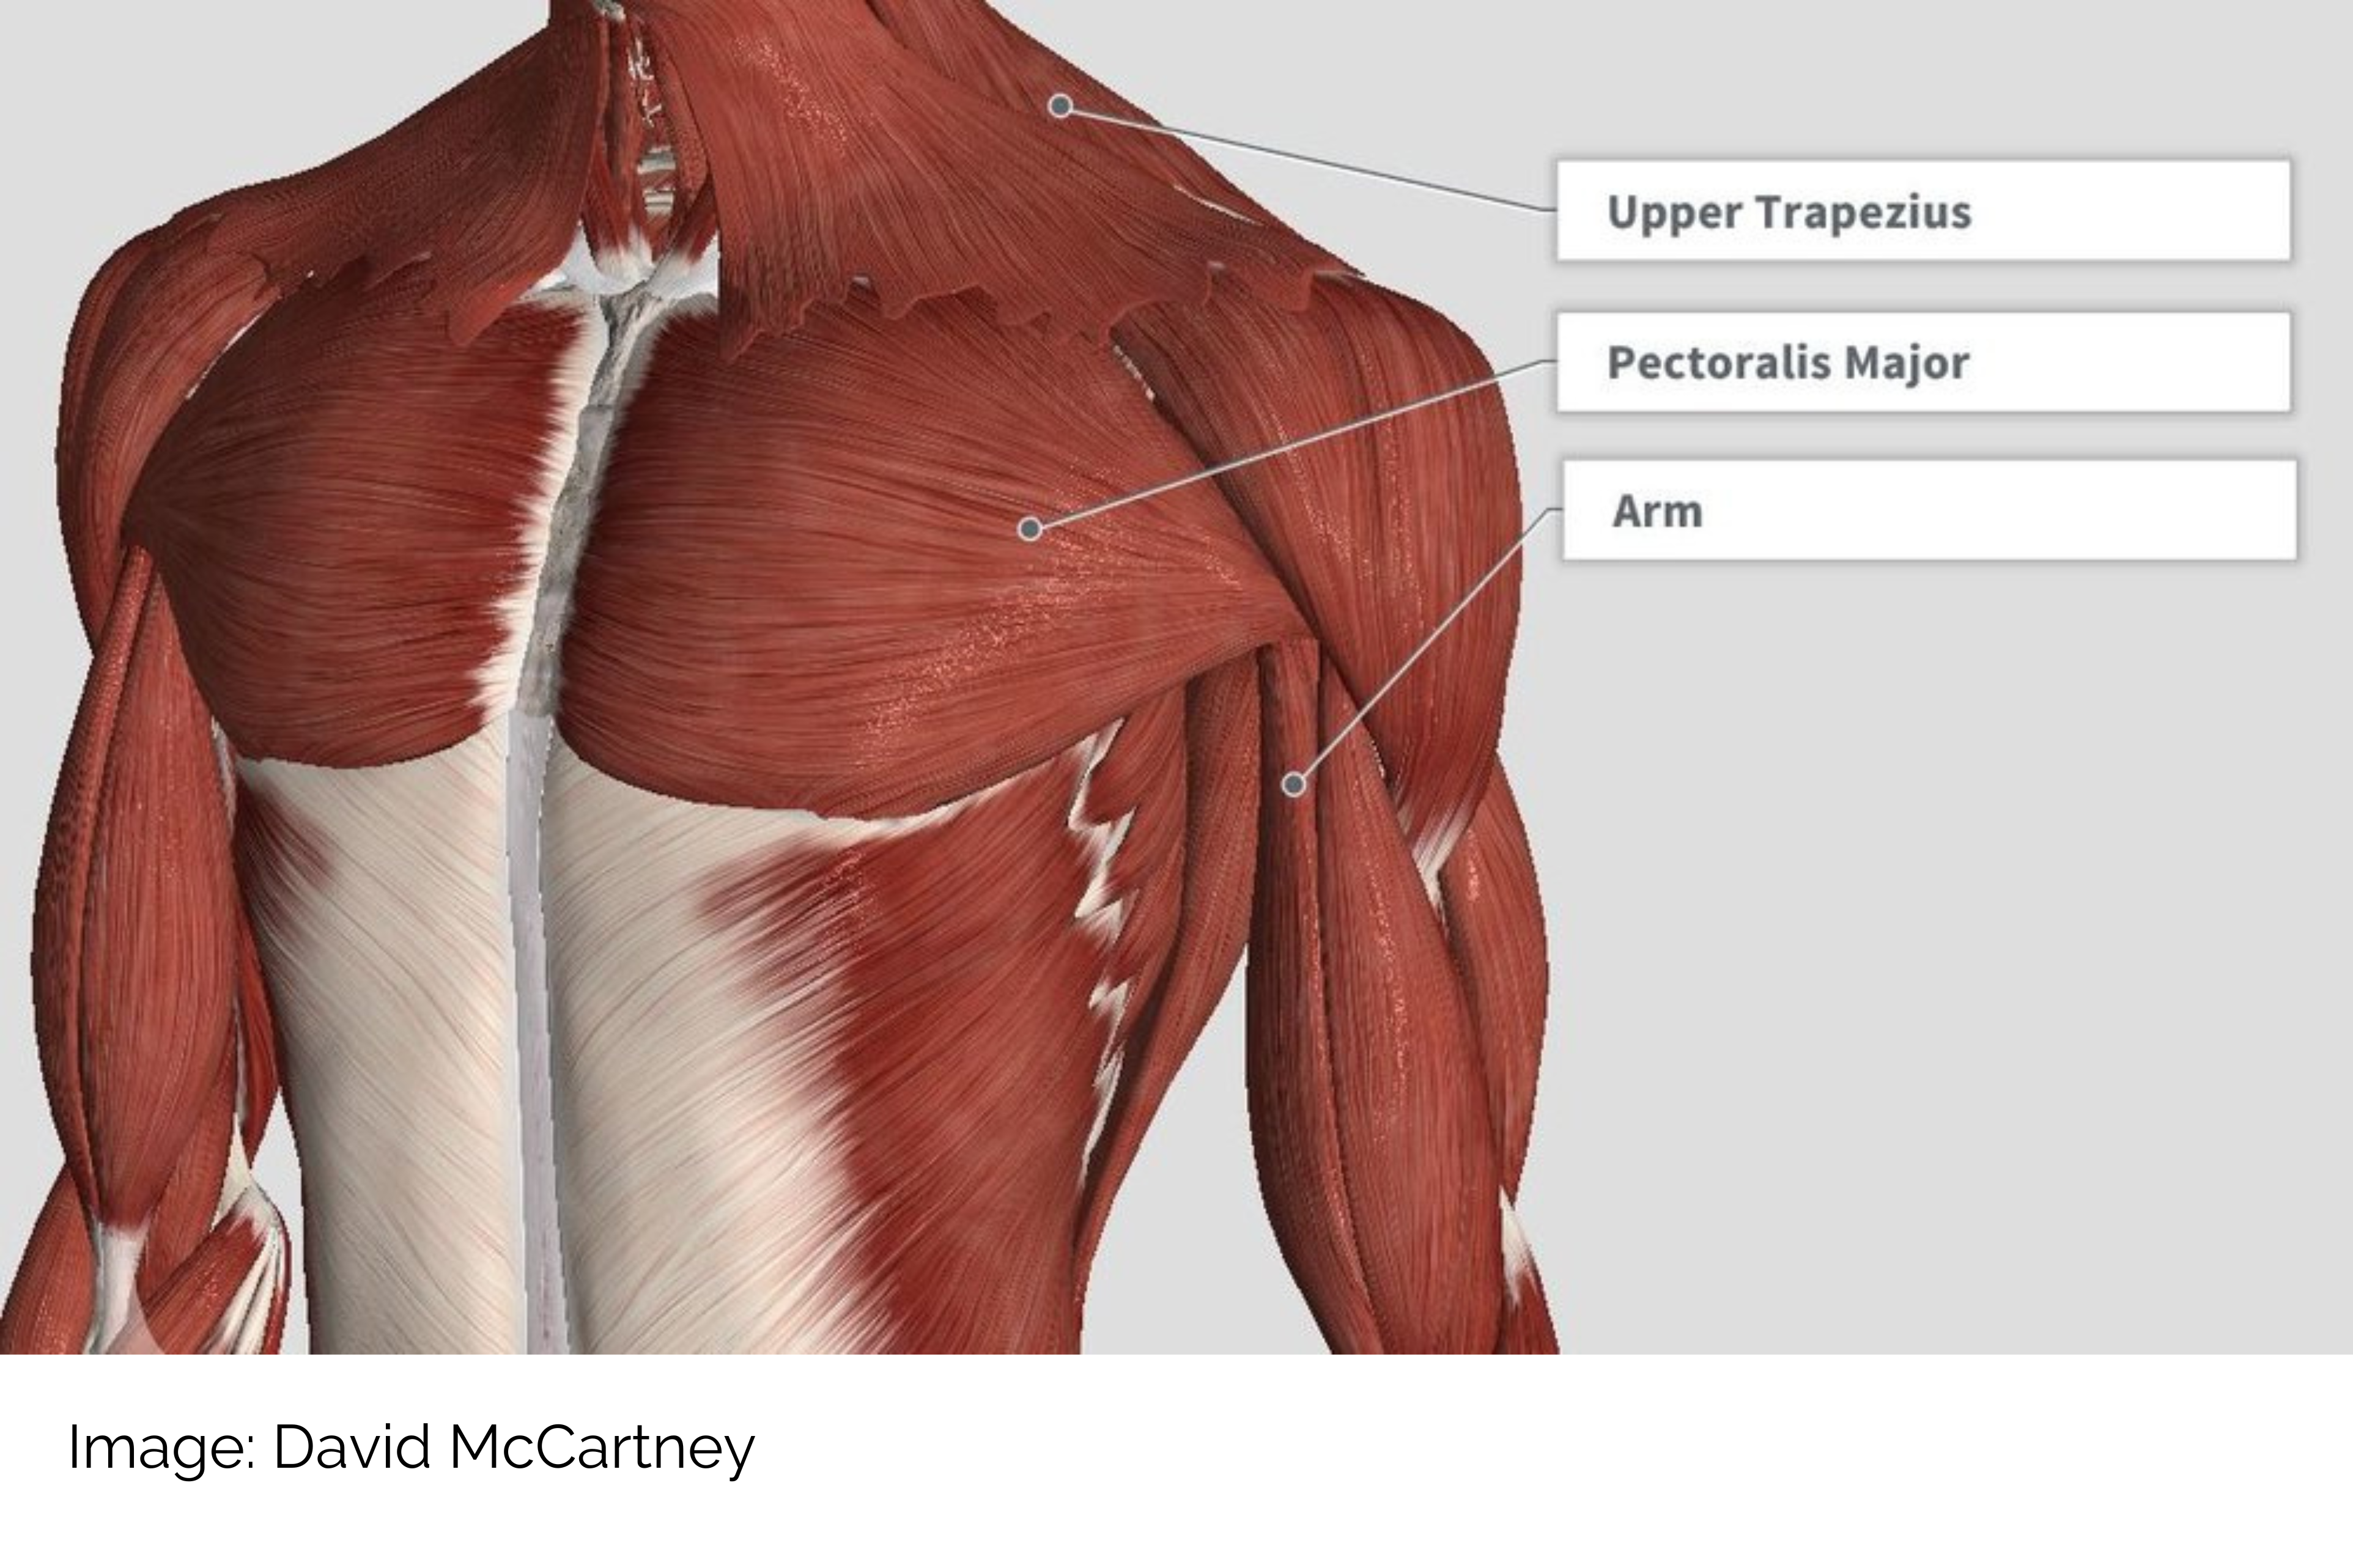 A graphic that depicts how the back and neck muscles connect to the chest muscles